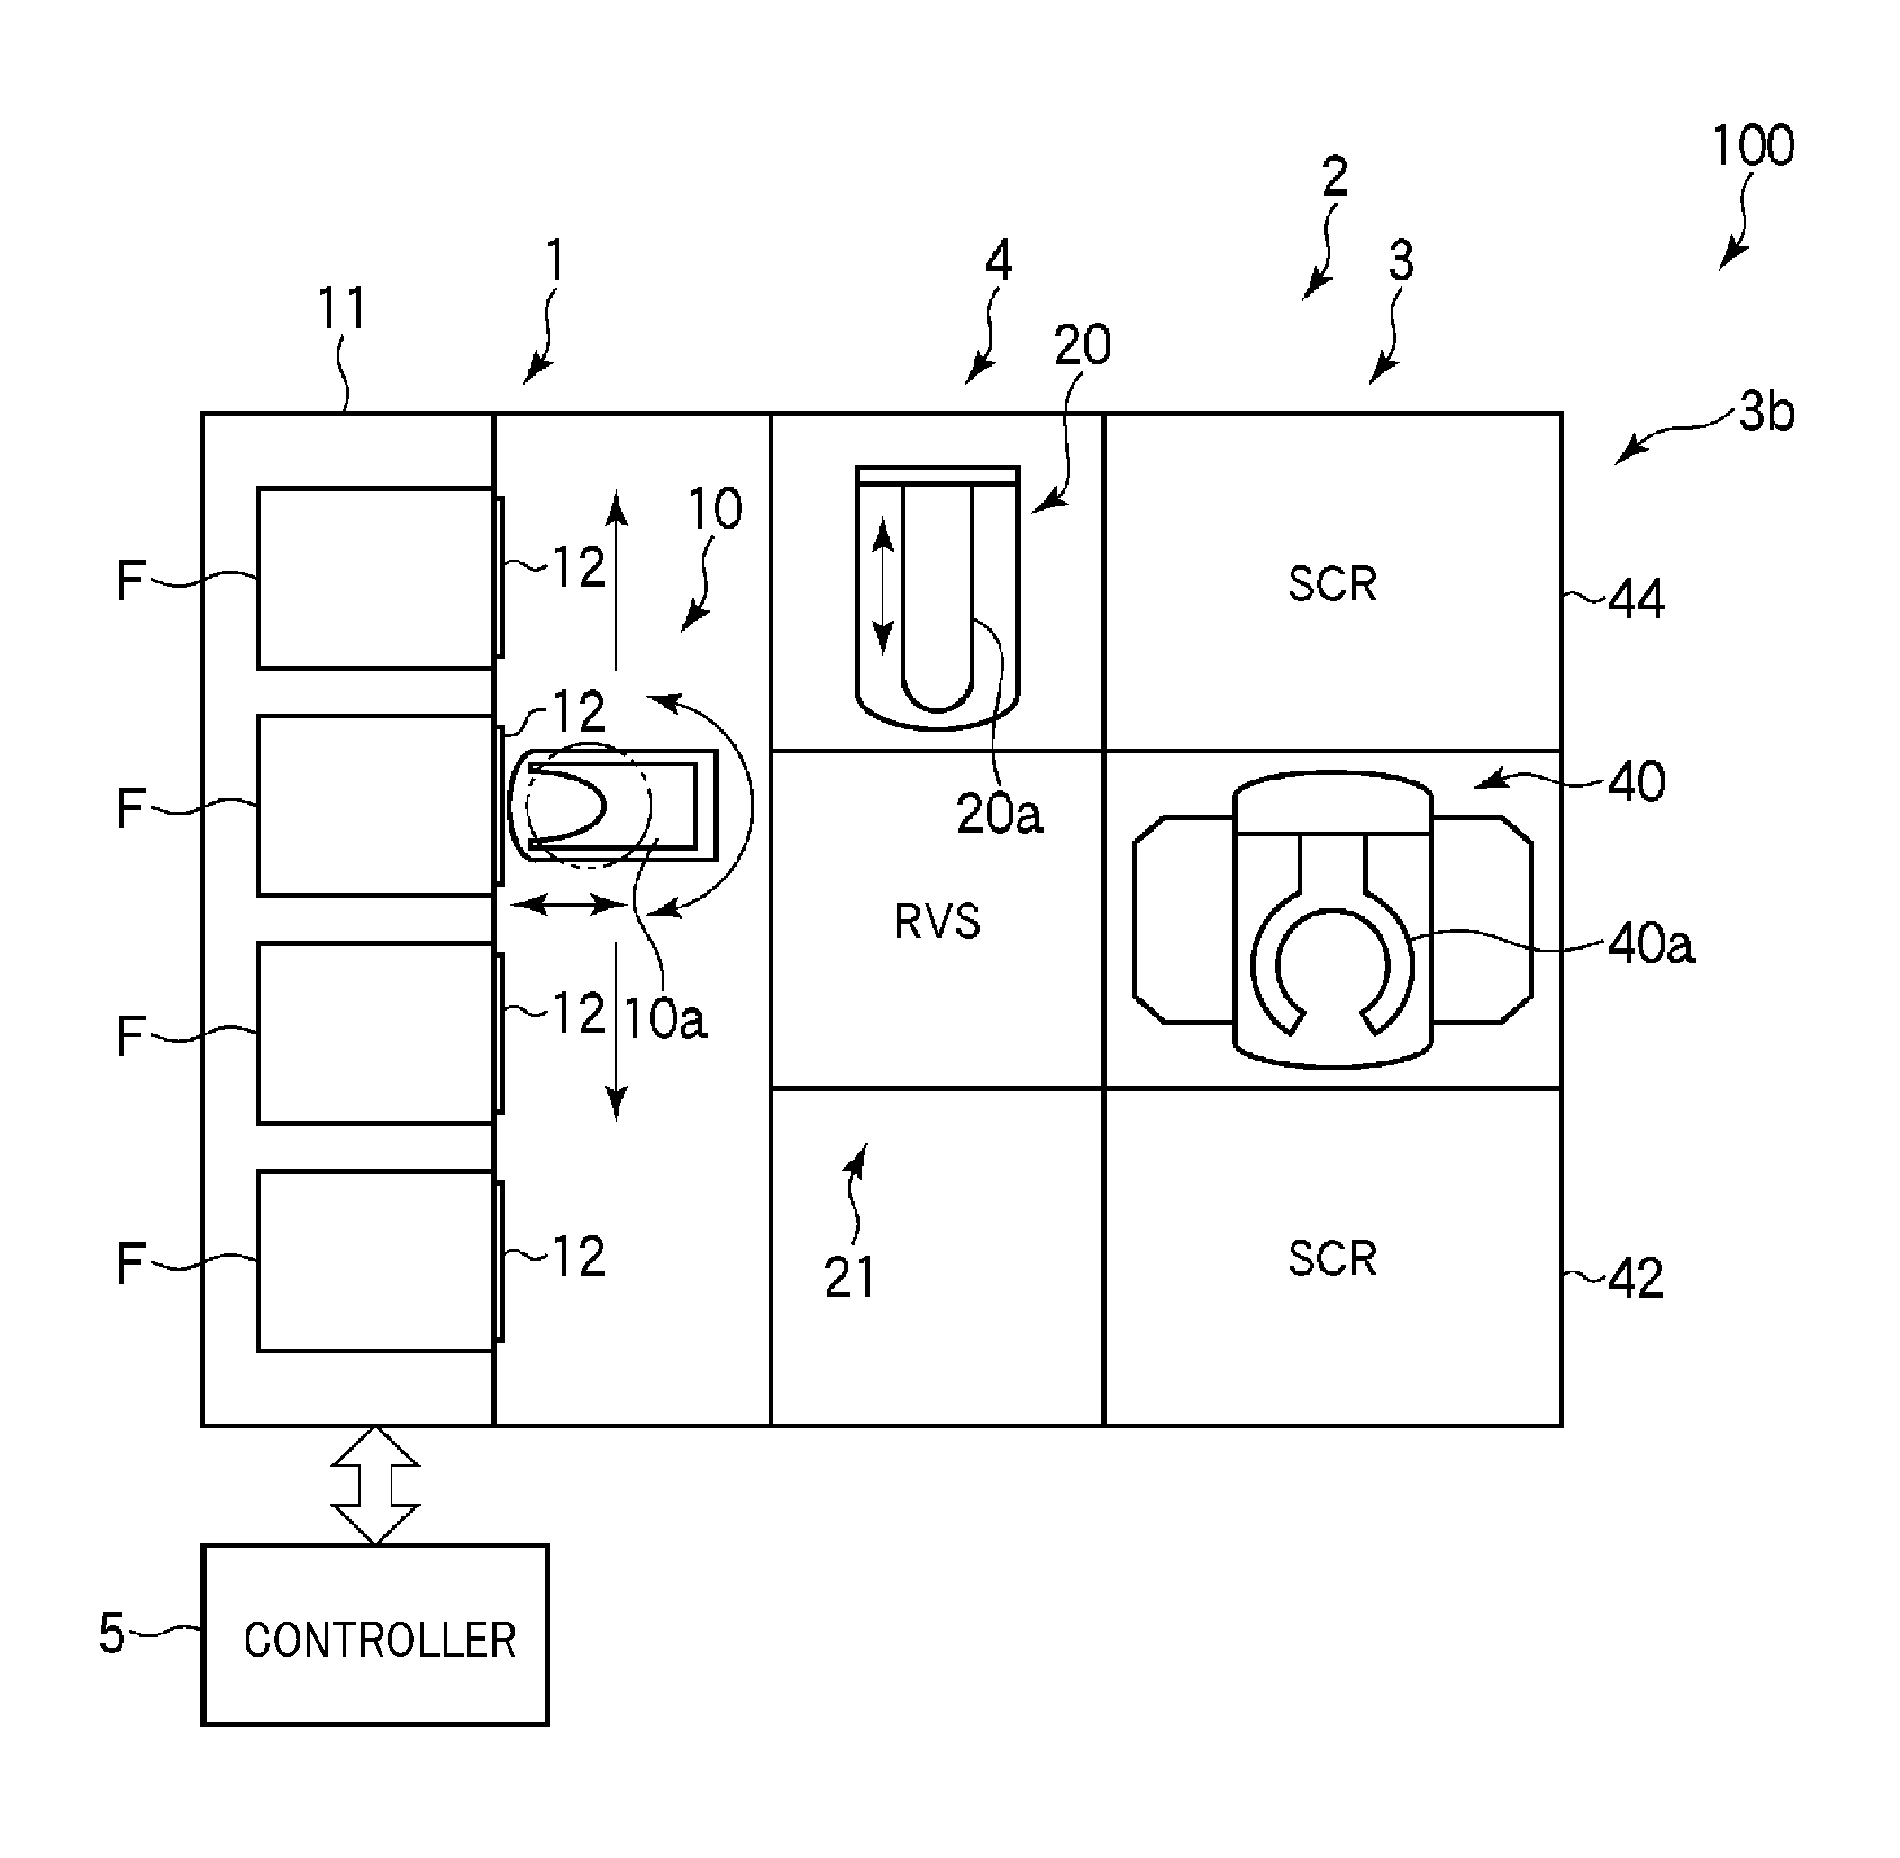 Substrate processing apparatus and substrate transfer method